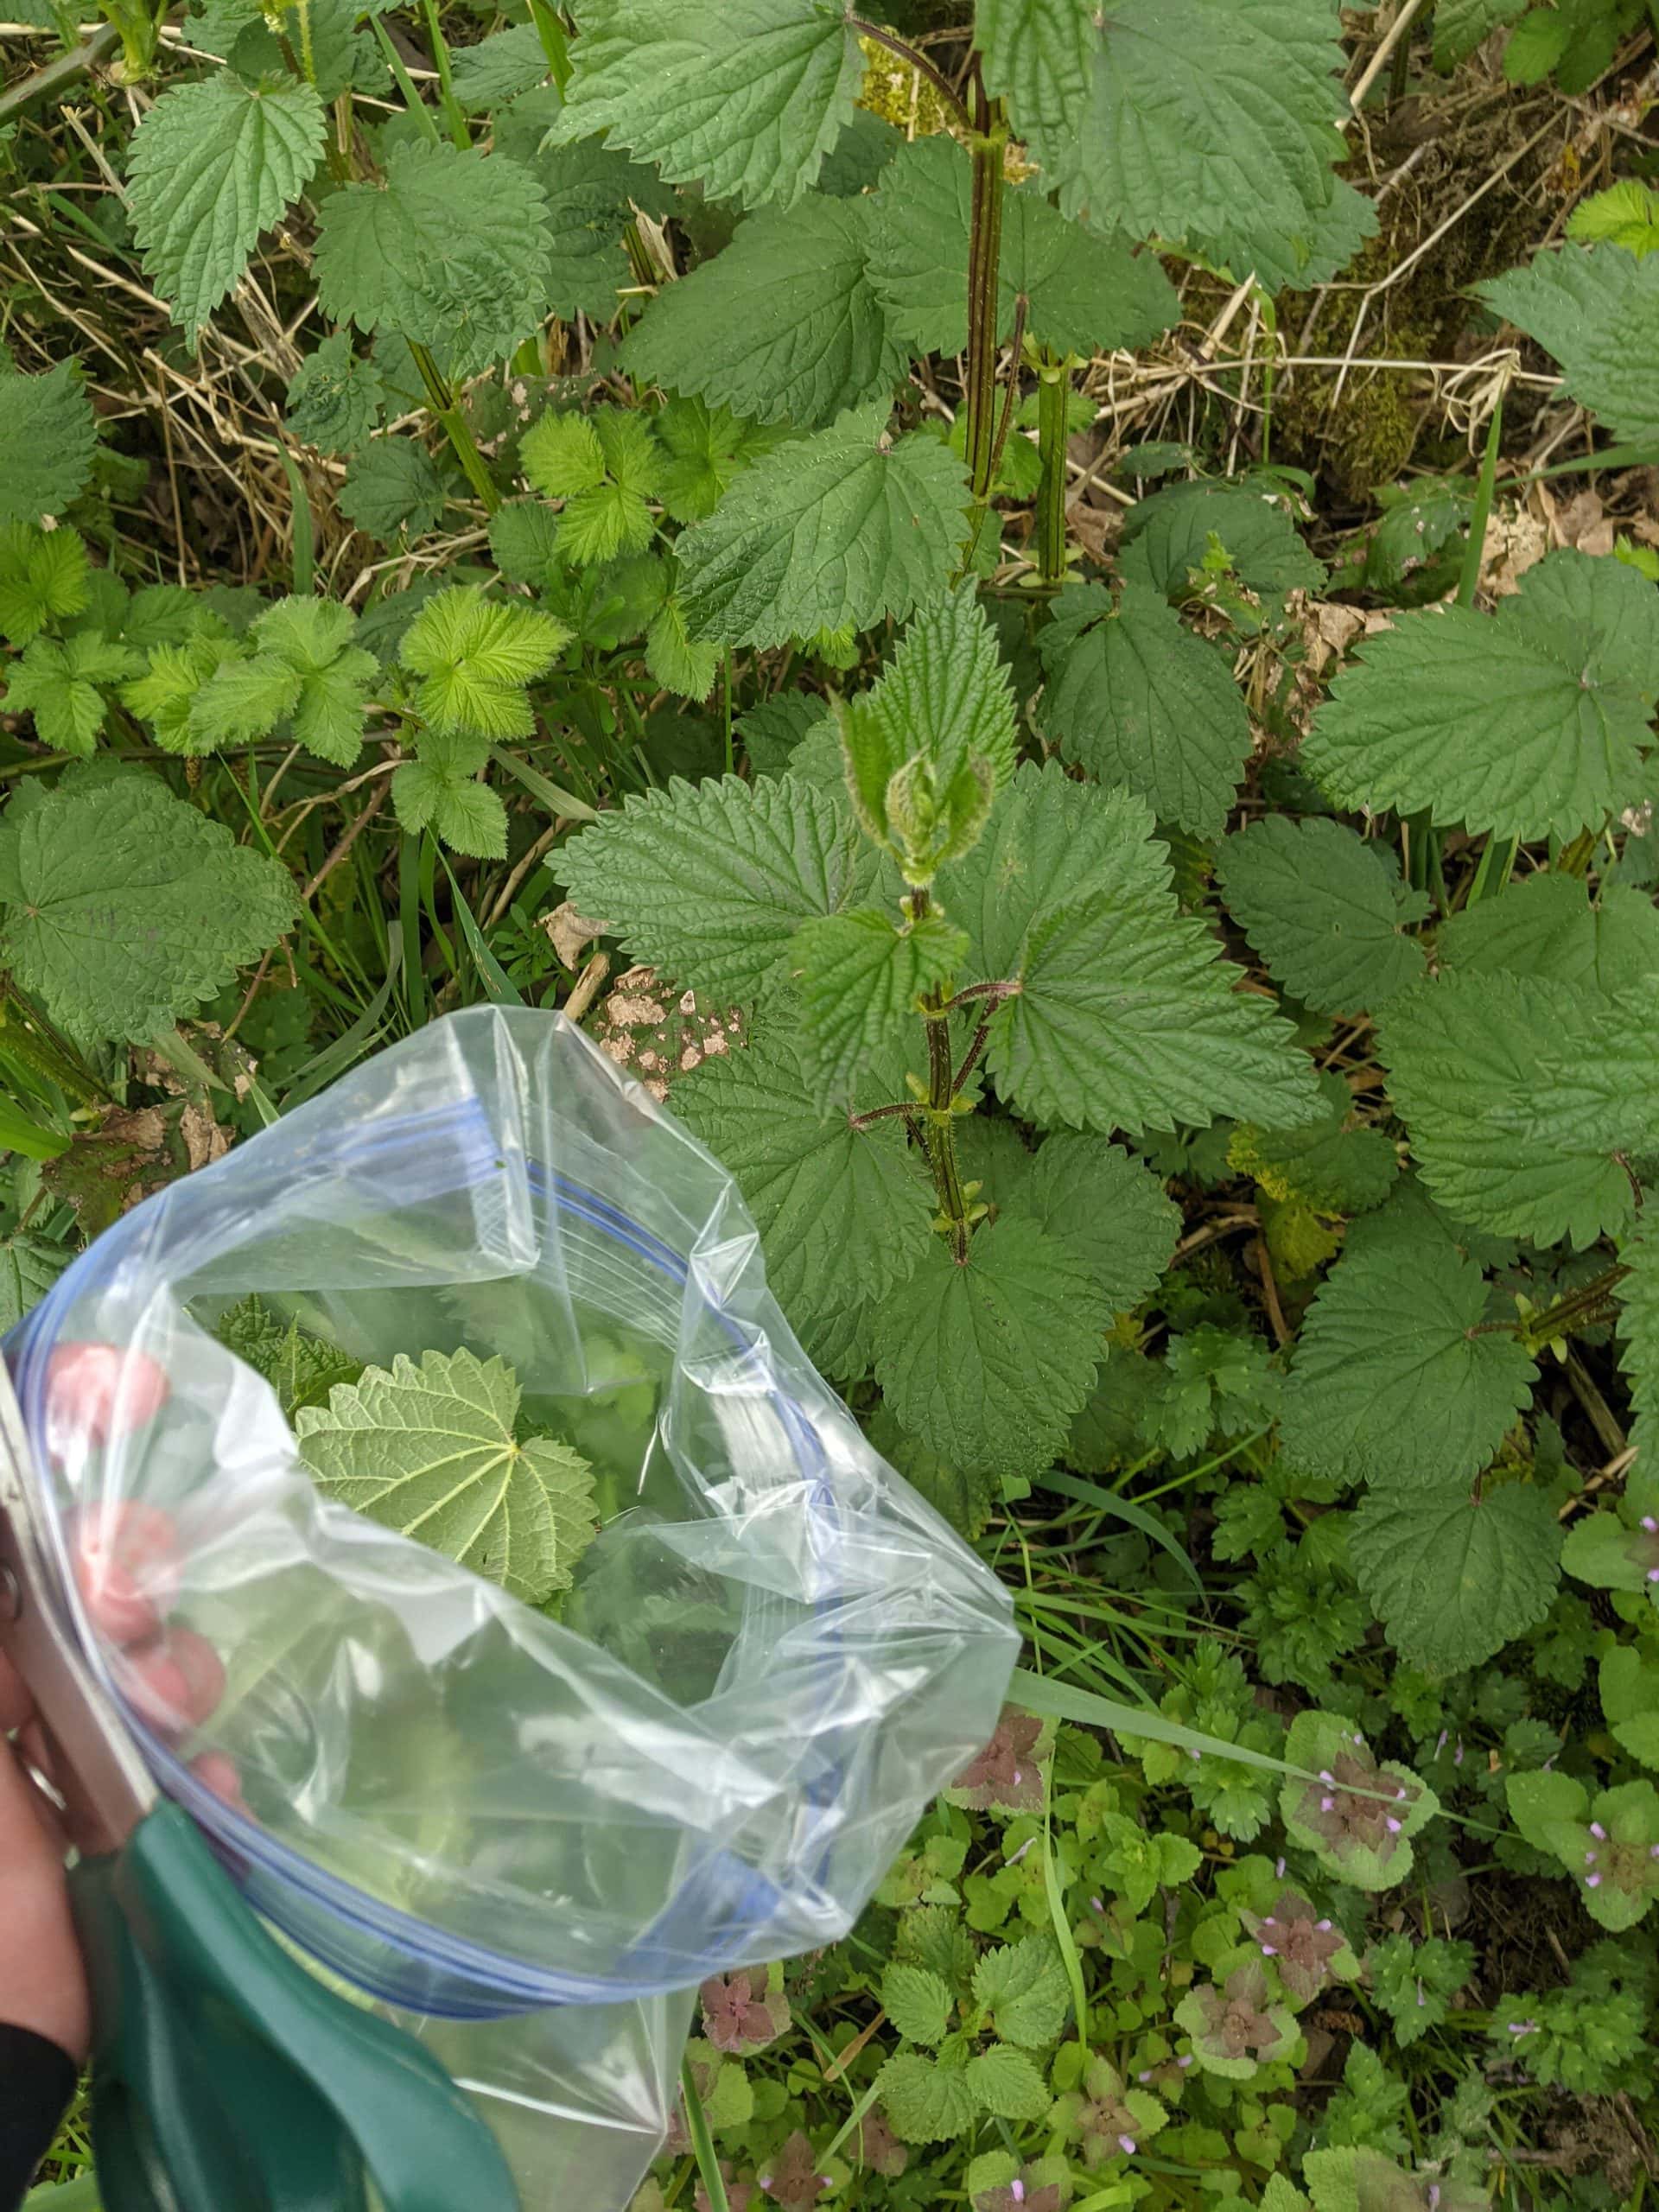 Collecting Stinging Nettles